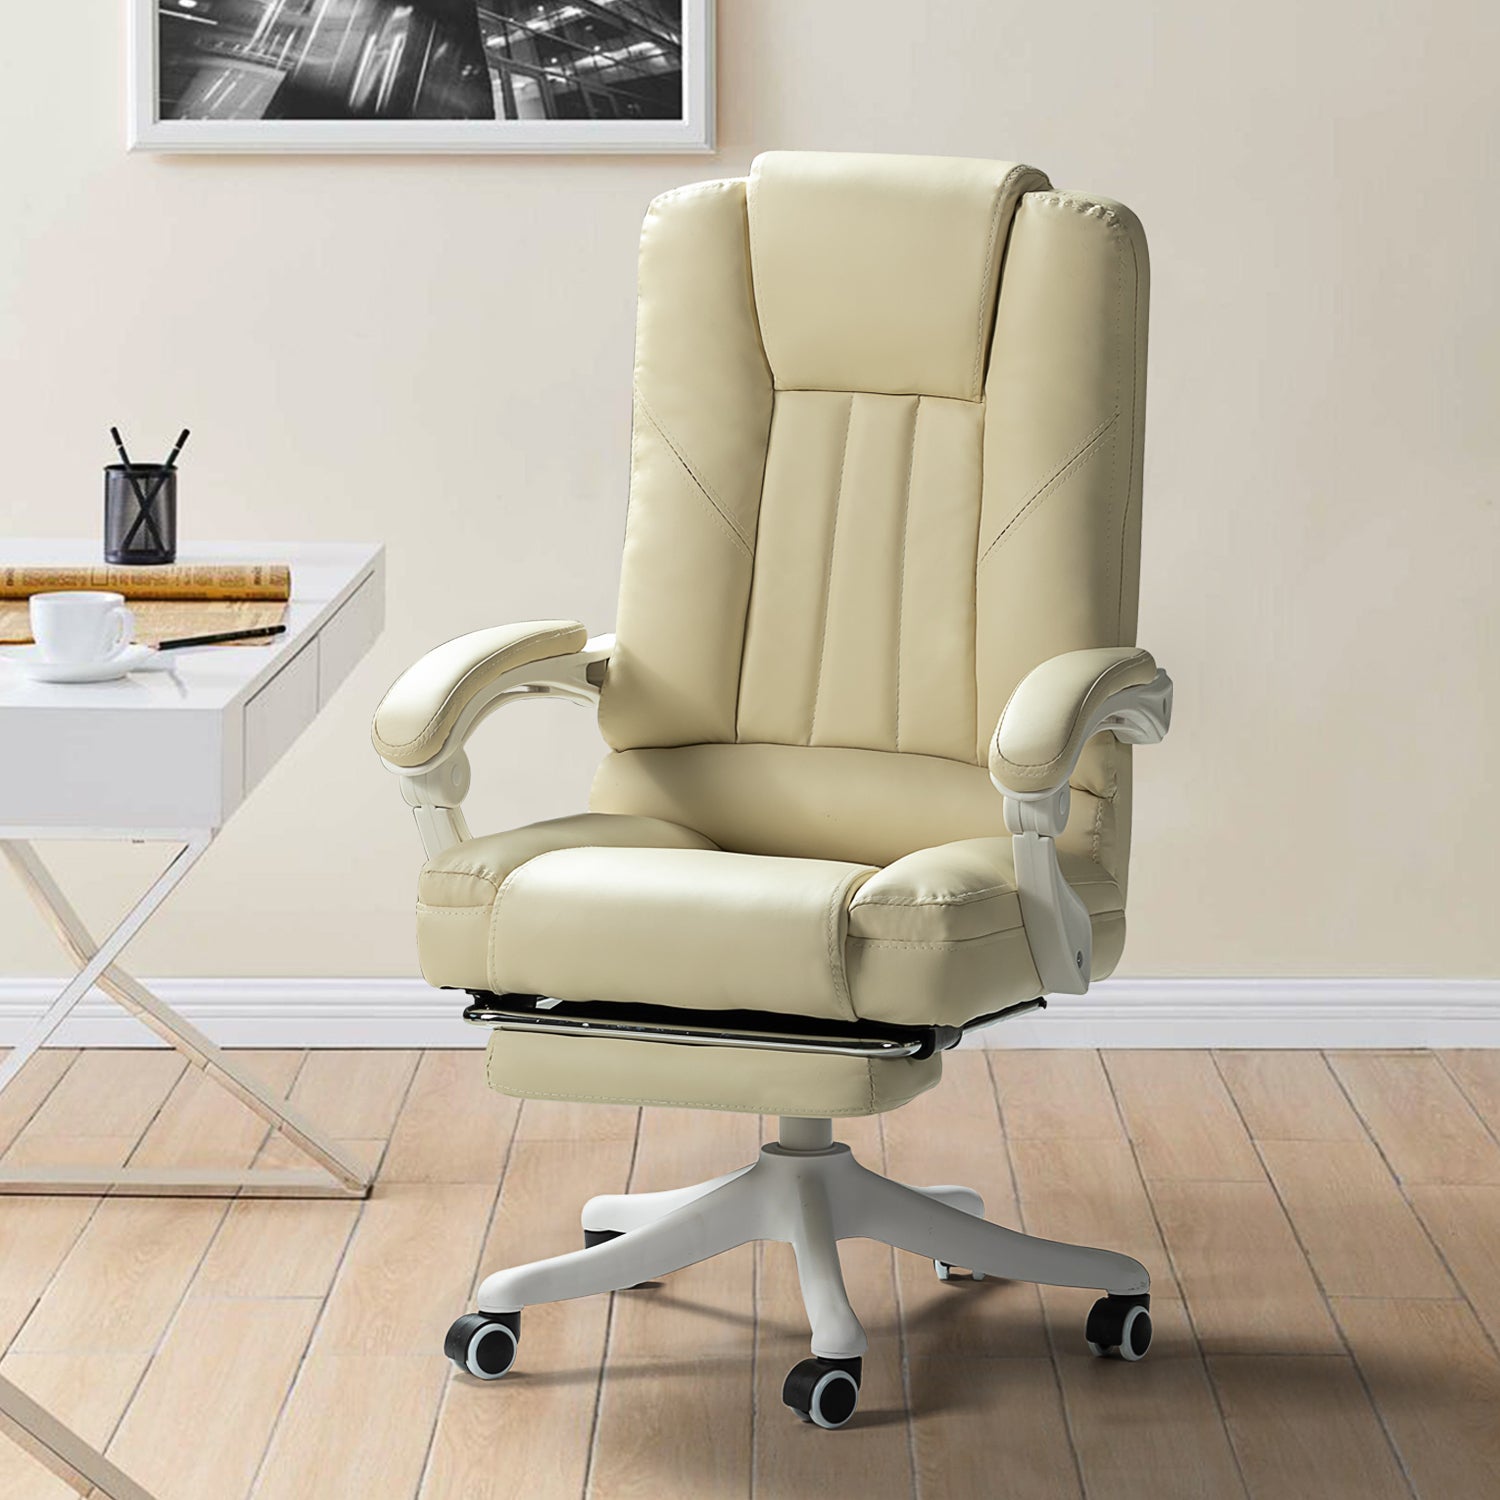 Flavia Swivel Gaming Chair with Adjustable Height (Ivory)